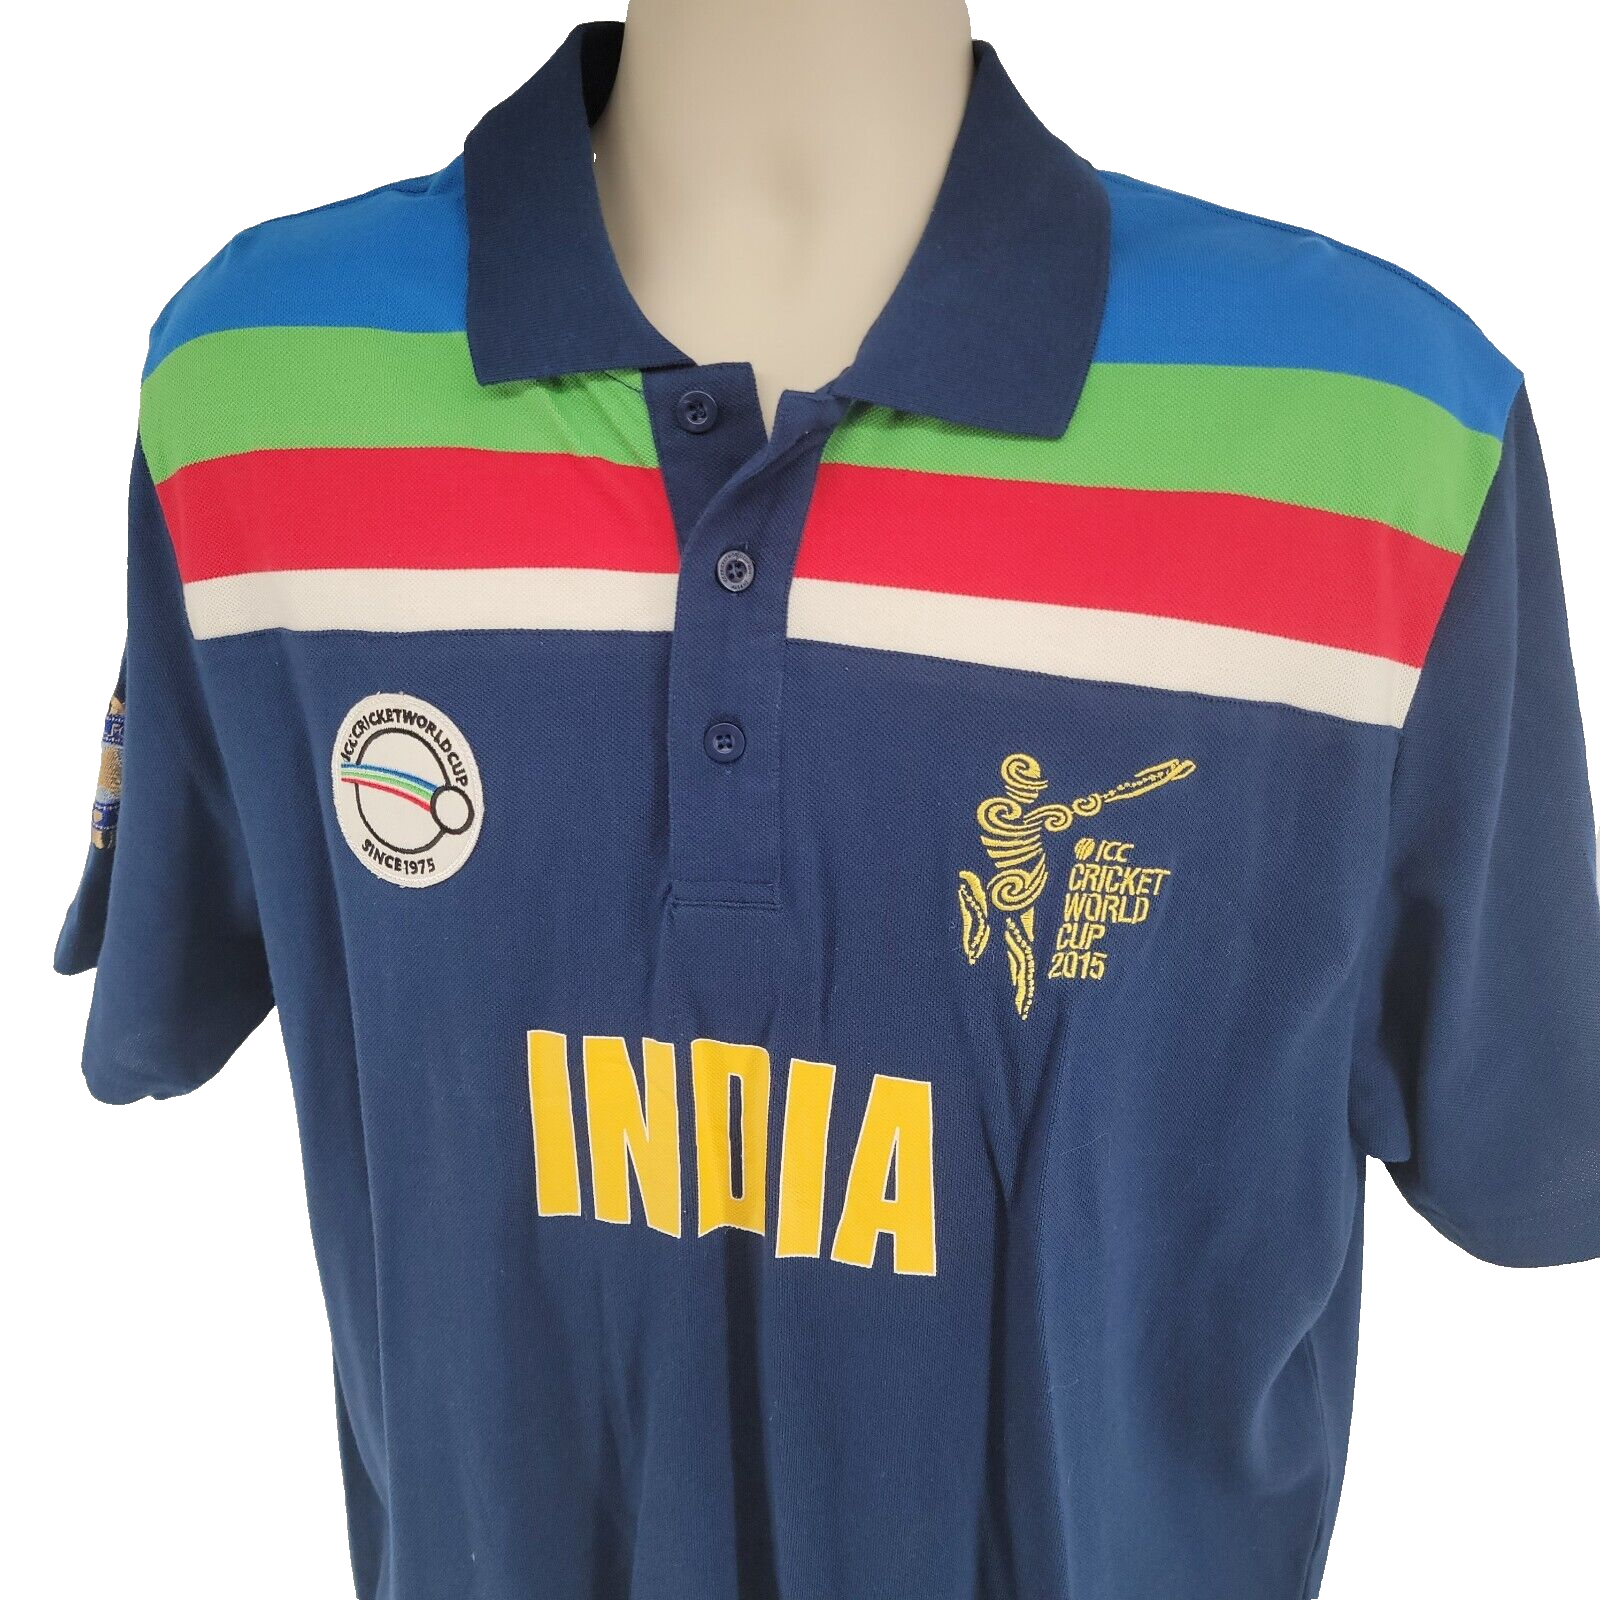 ICC Cricket World Cup 2015 India Jersey Polo Shirt Mens 2XL ICC Cricket World Cup CWC12398